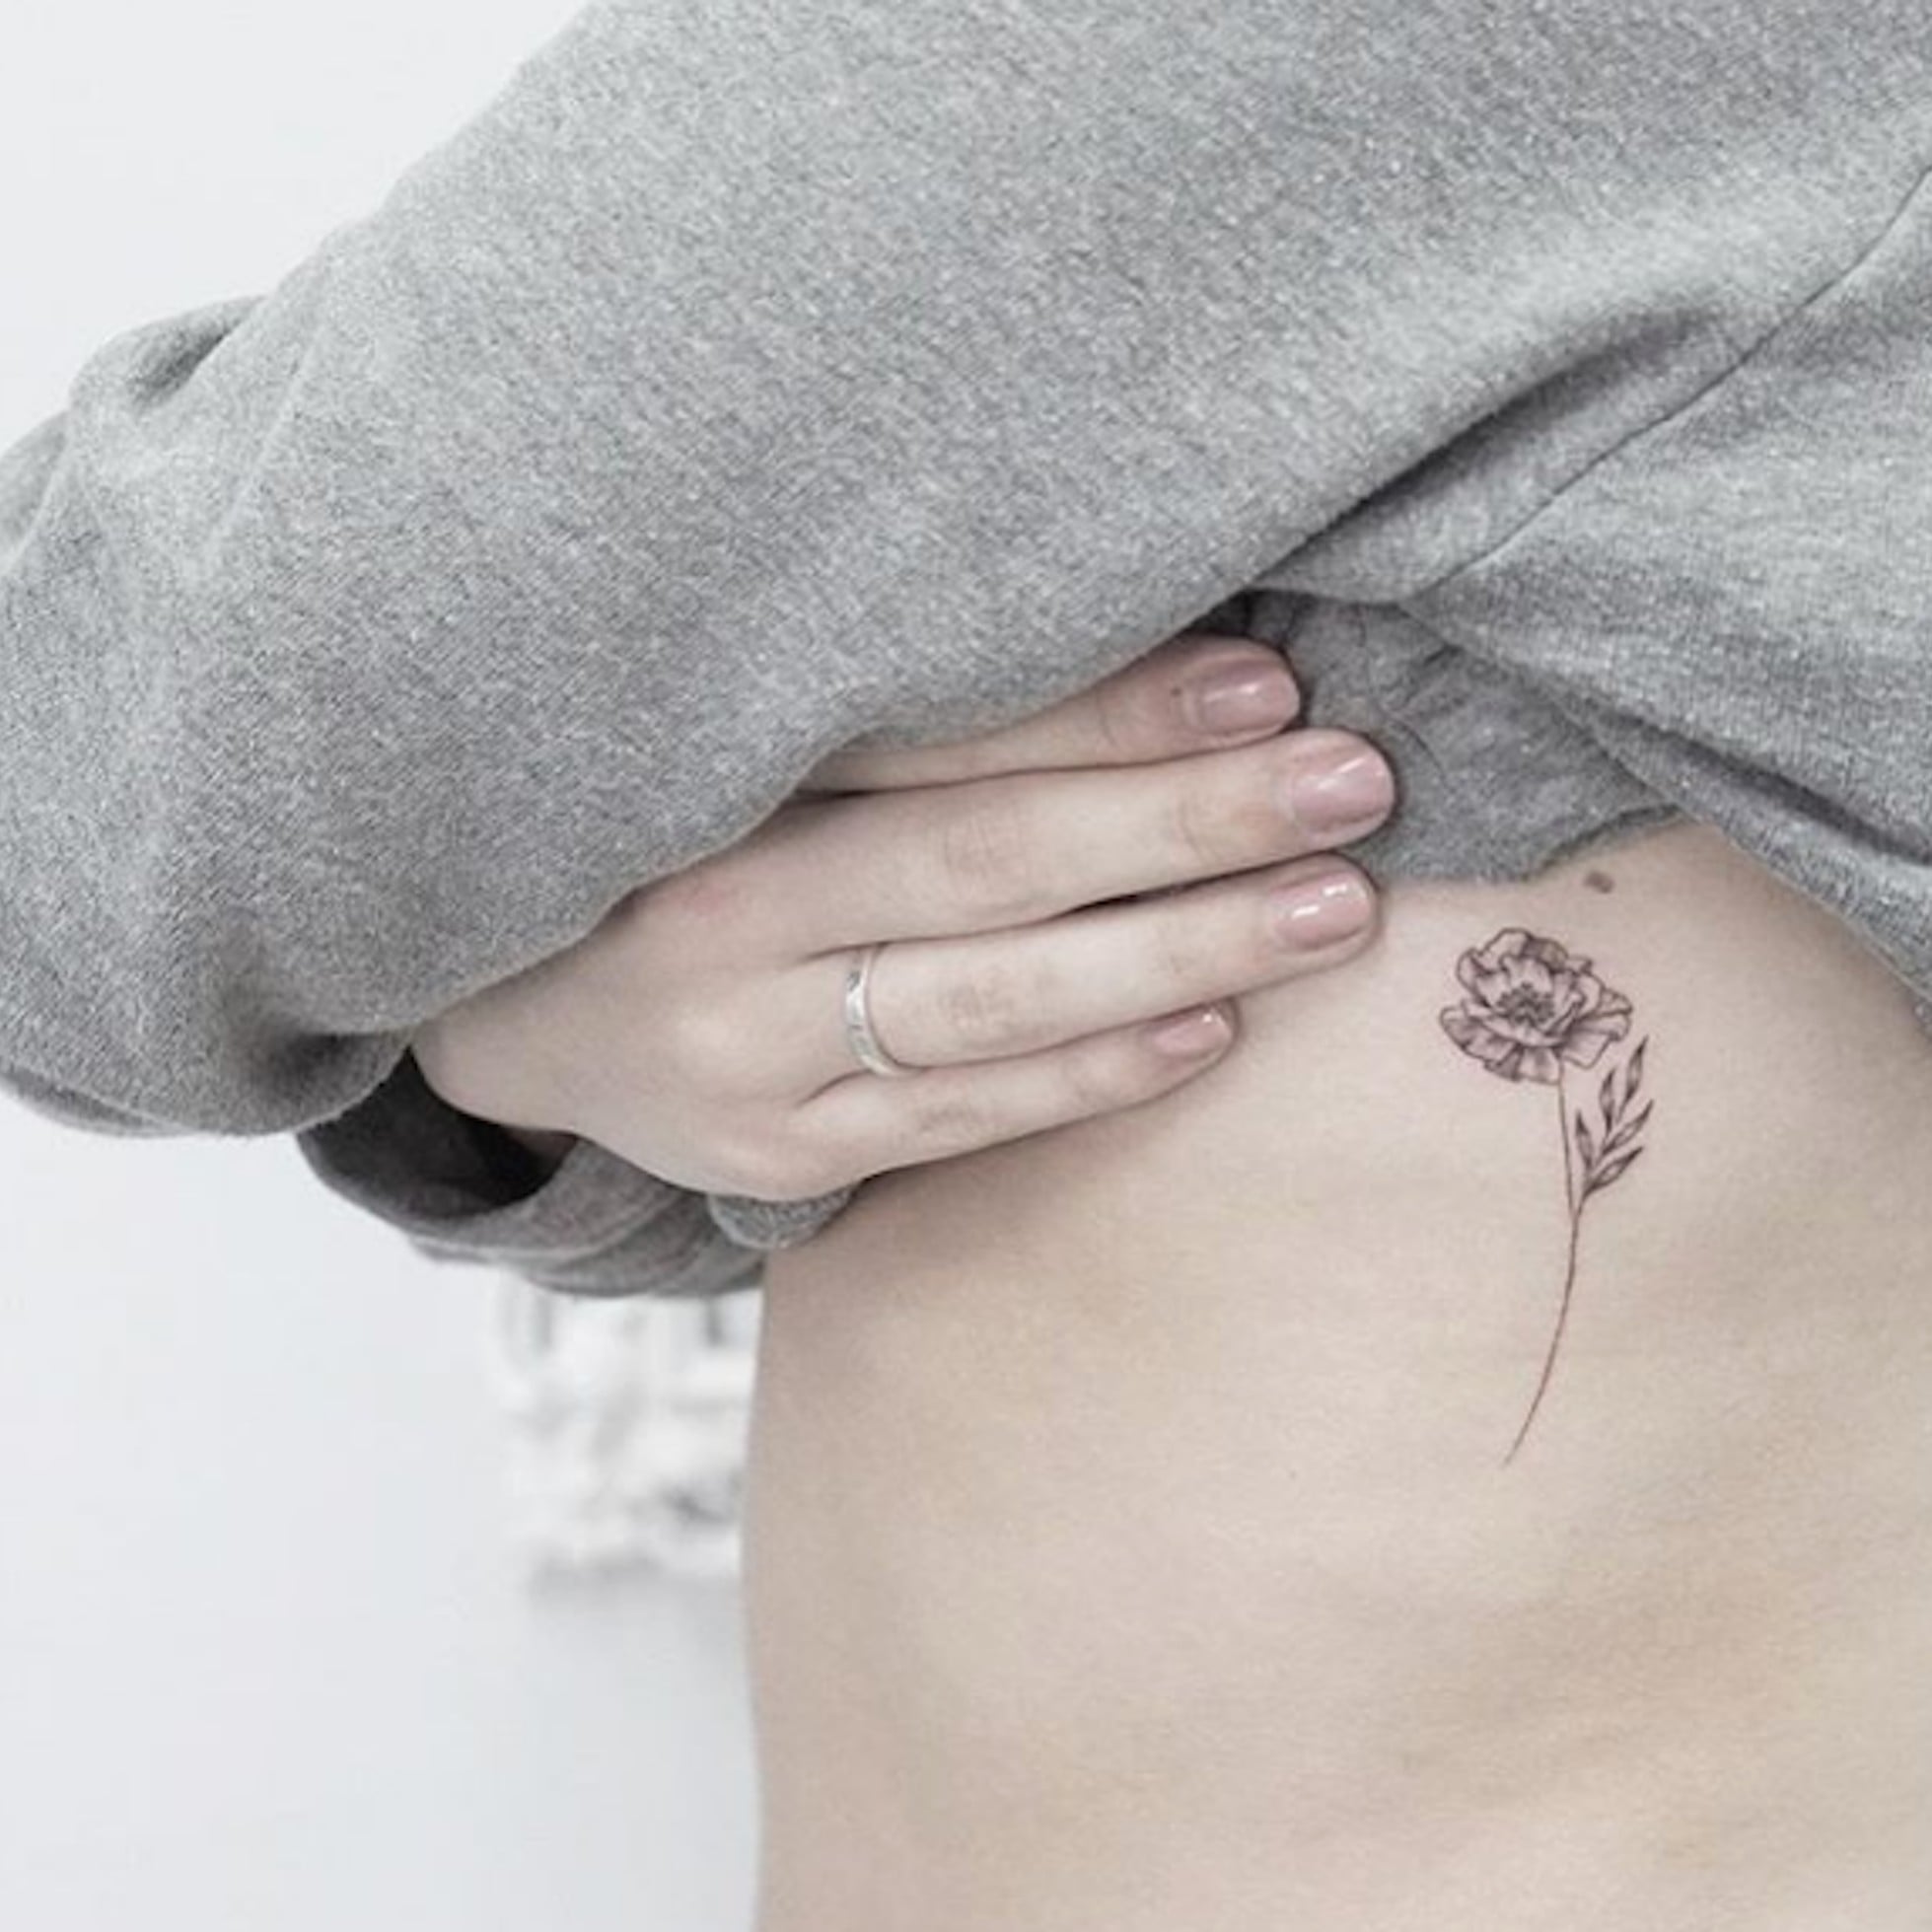 Body Parts To Tattoo And Those To Avoid To Ensure It Looks Beautiful In  The Long Run  GirlStyle Singapore